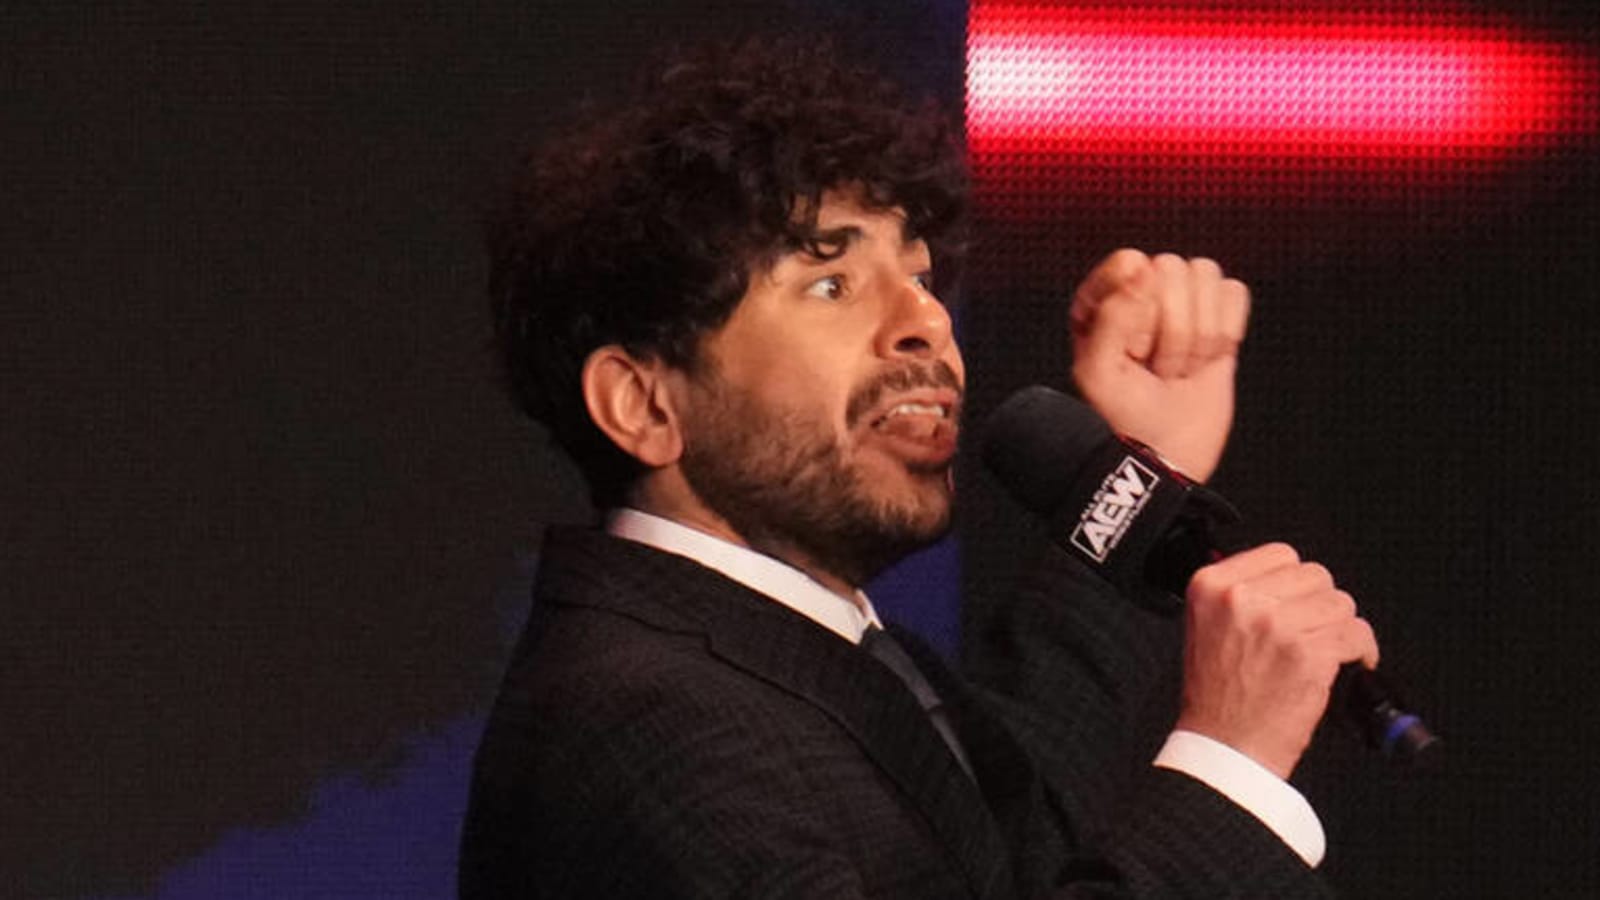 All In delivers for AEW and Tony Khan